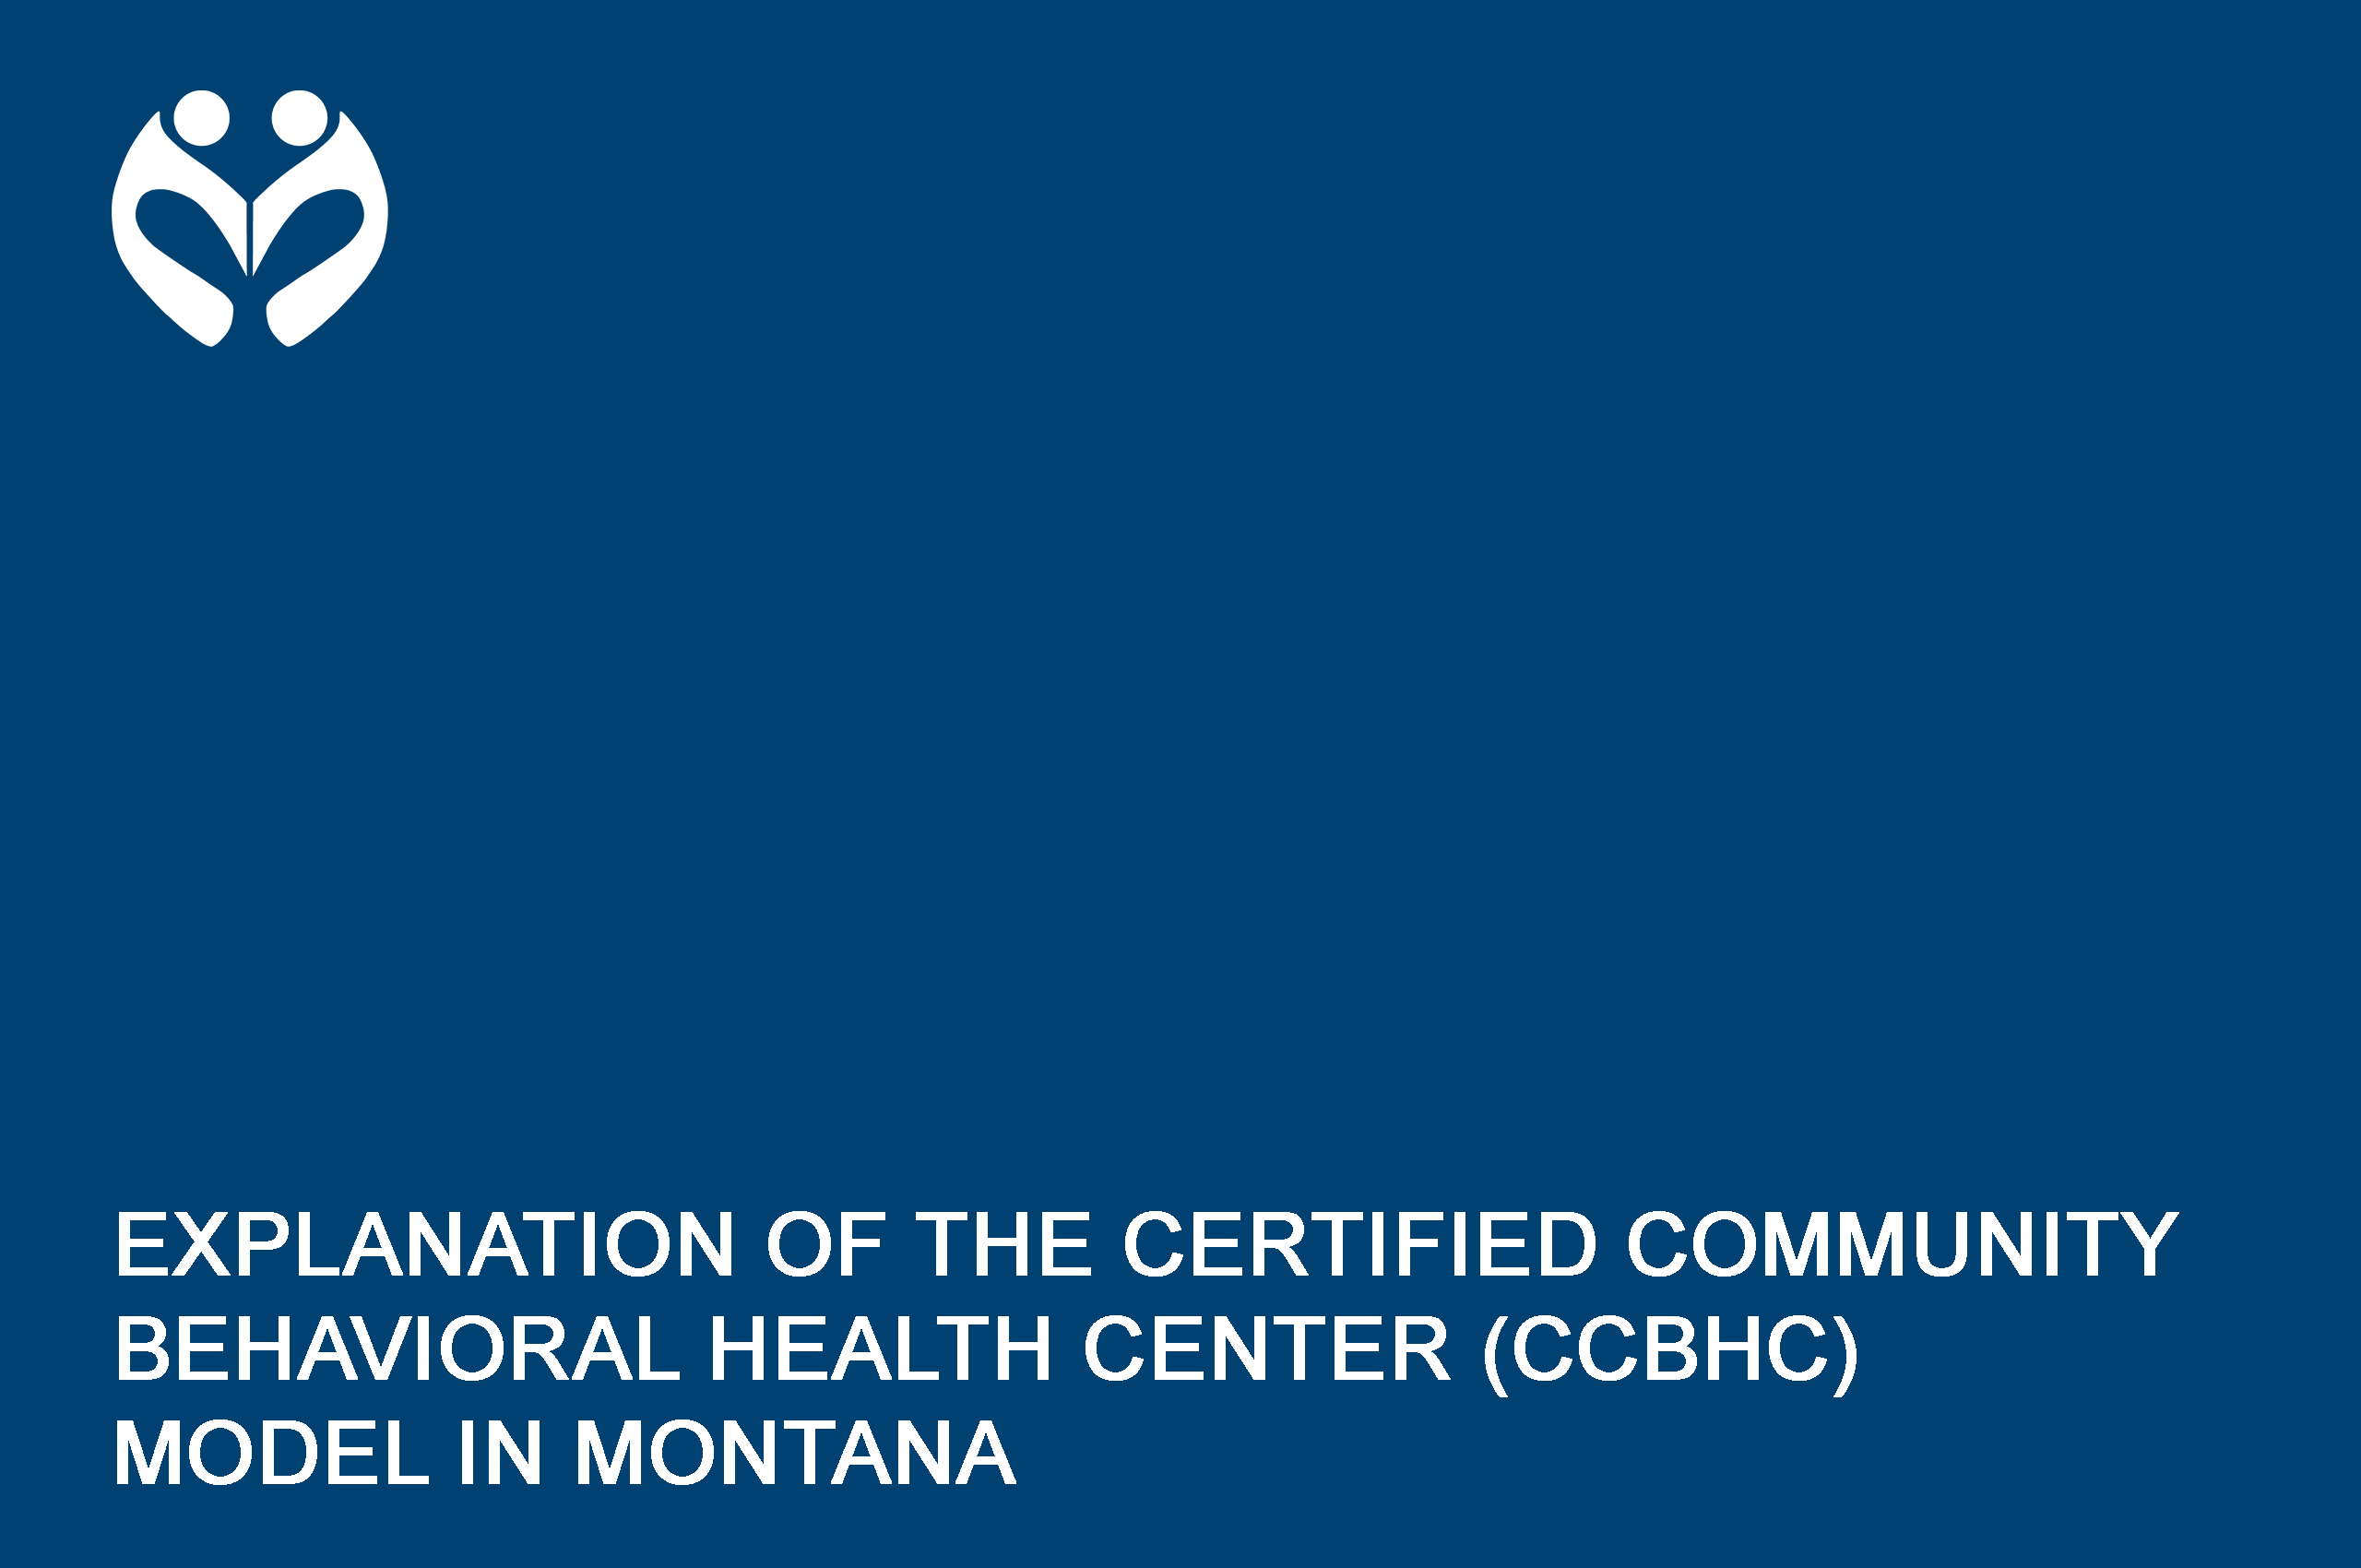 A blue rectangle with the words EXPLANATION OF THE CERTIFIED COMMUNITY BEHAVIORAL HEALTH CENTER (CCBHC) MODEL IN MONTANA written in white